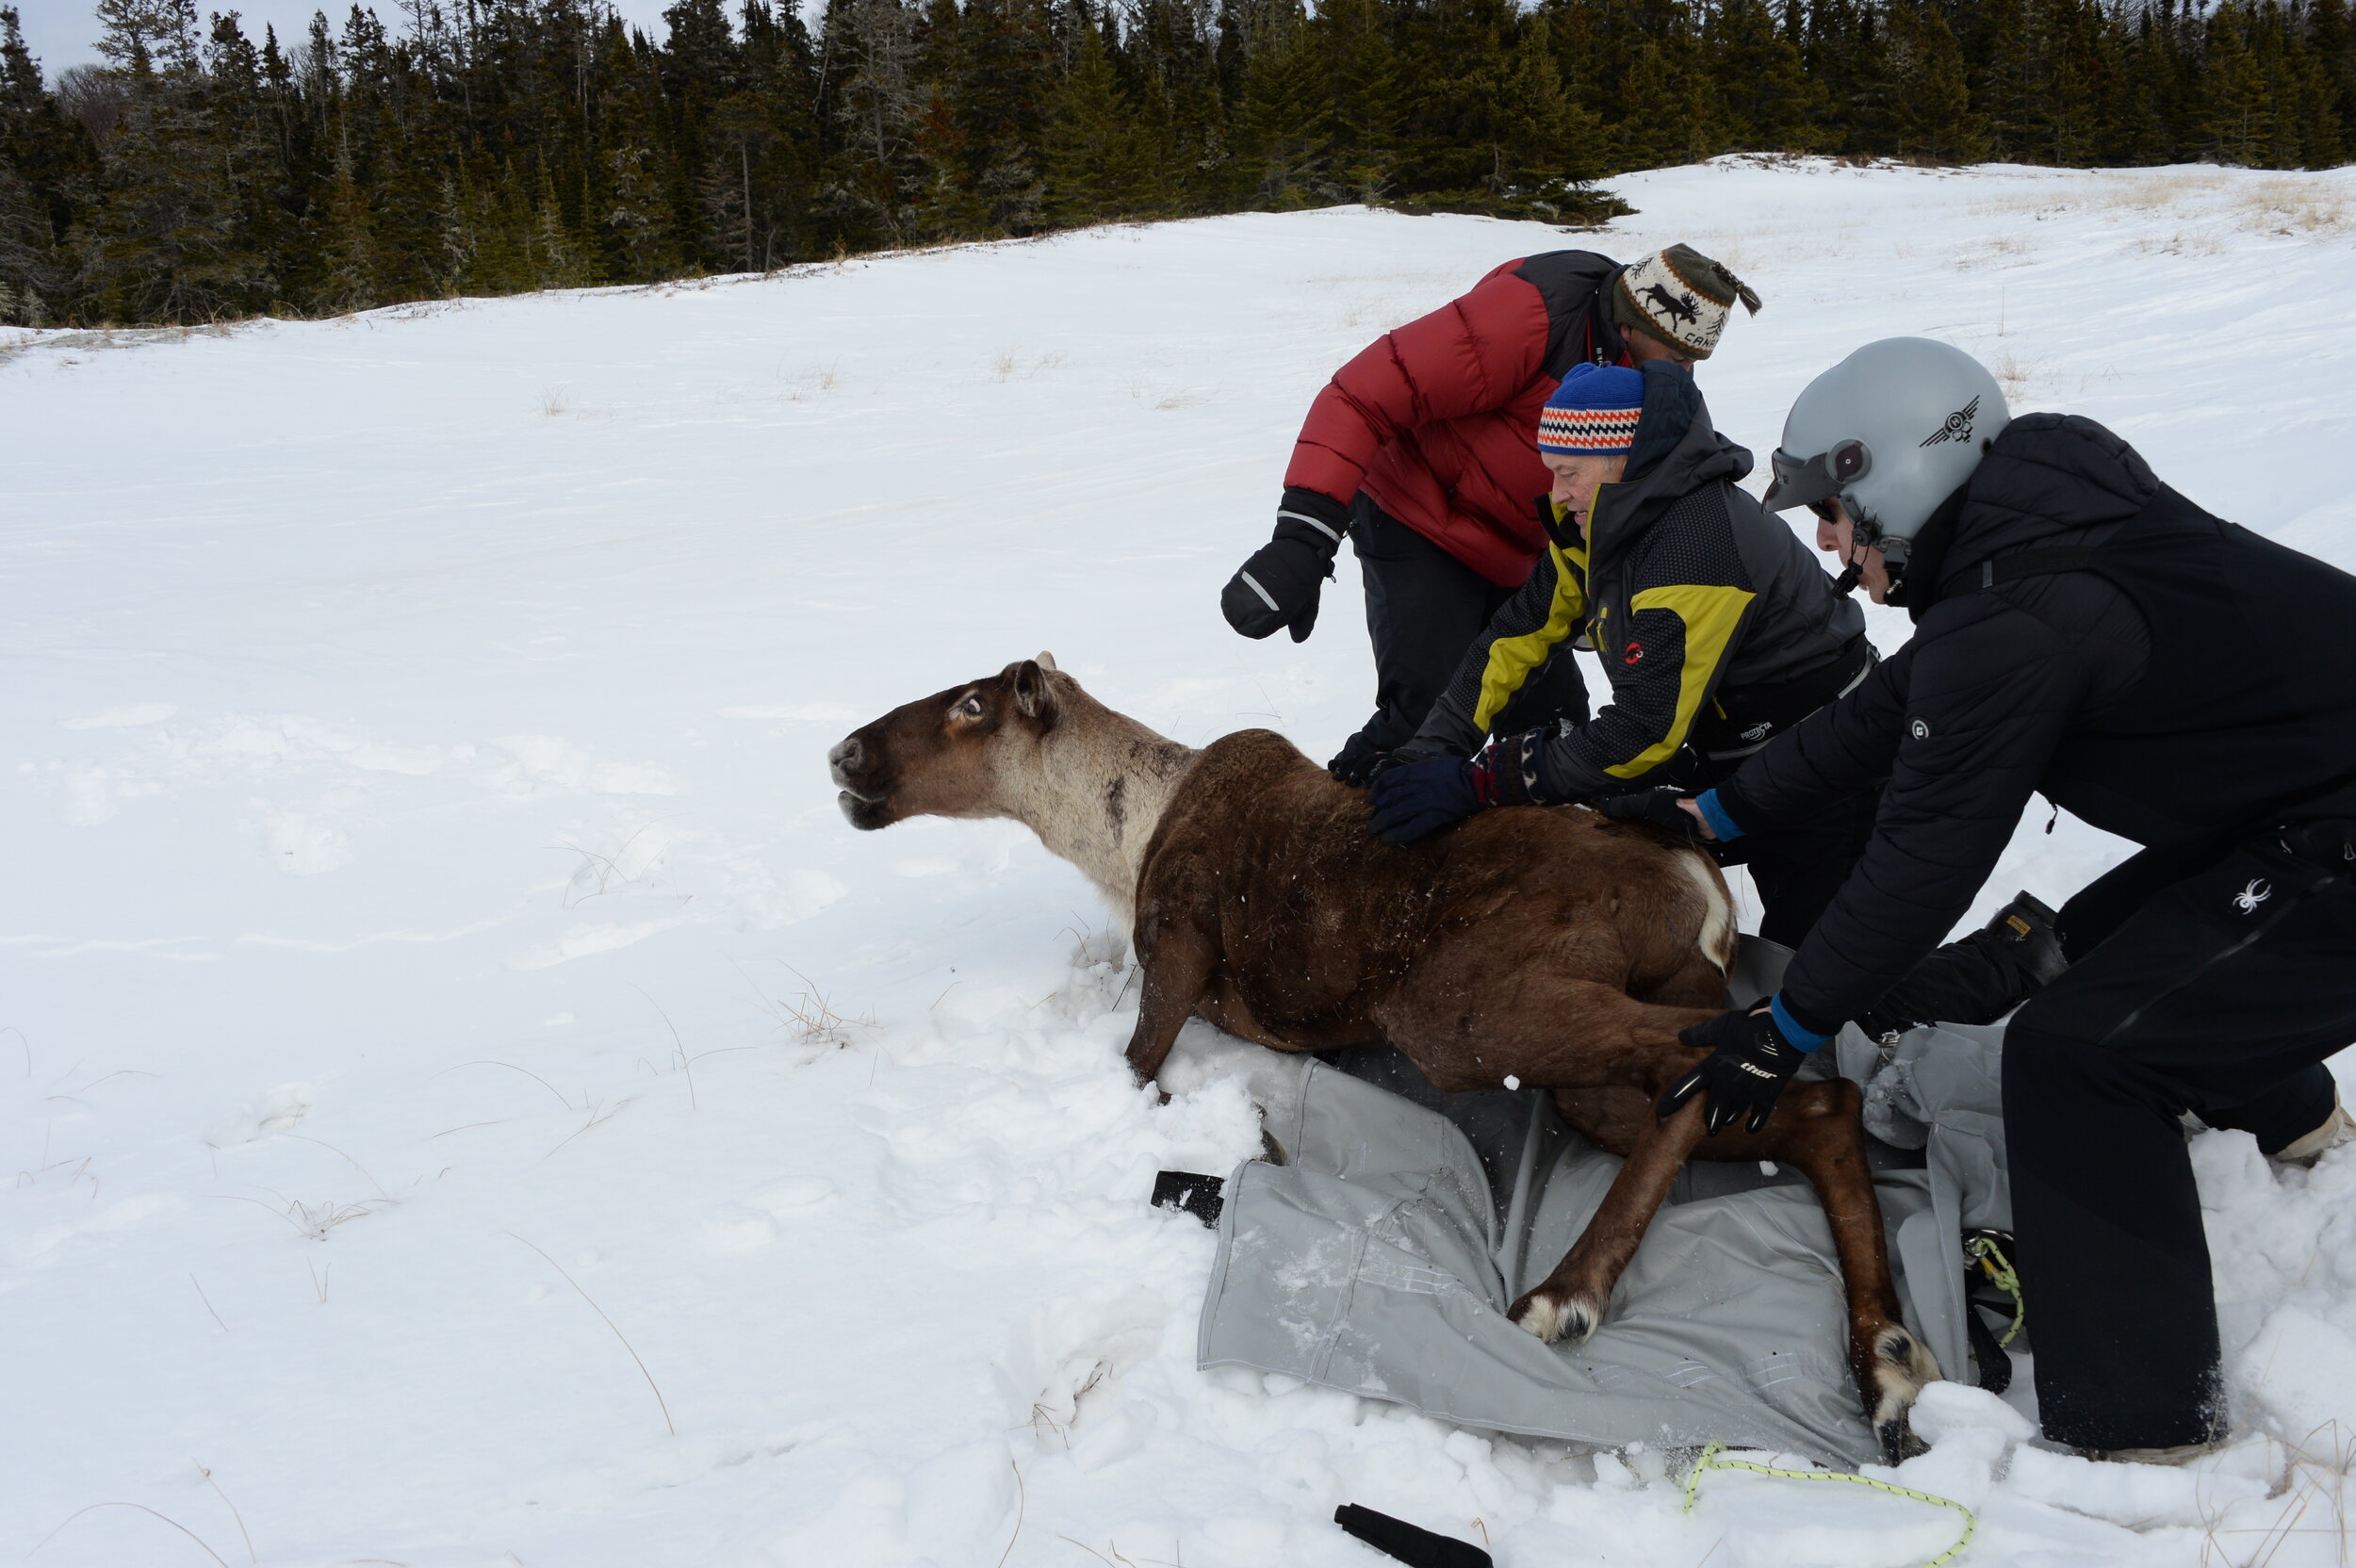 A caribou is released into the snow by three men